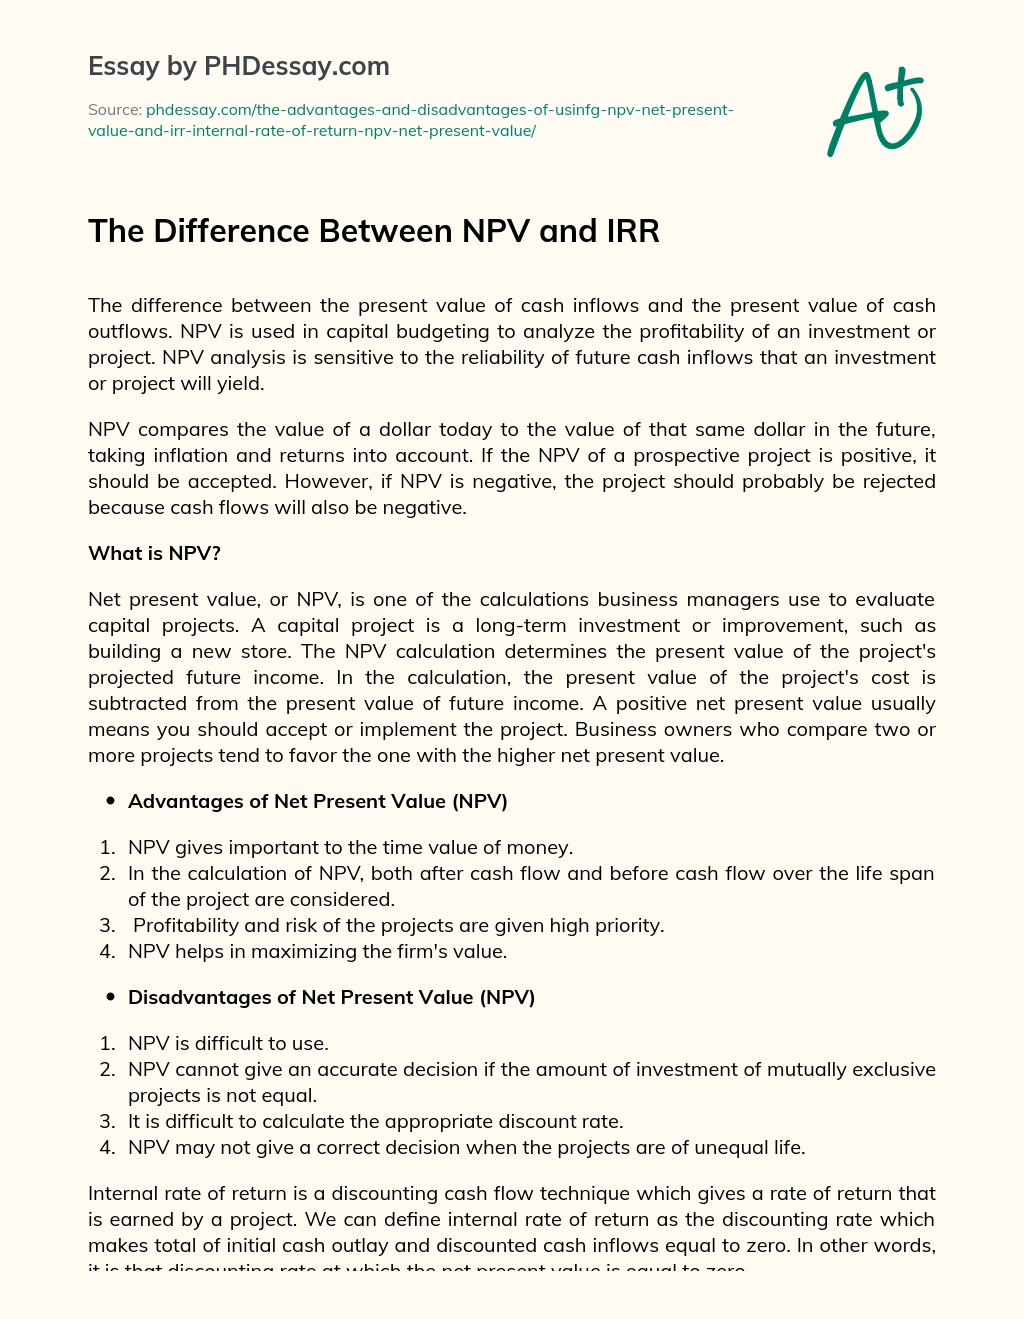 The Difference Between NPV and IRR essay